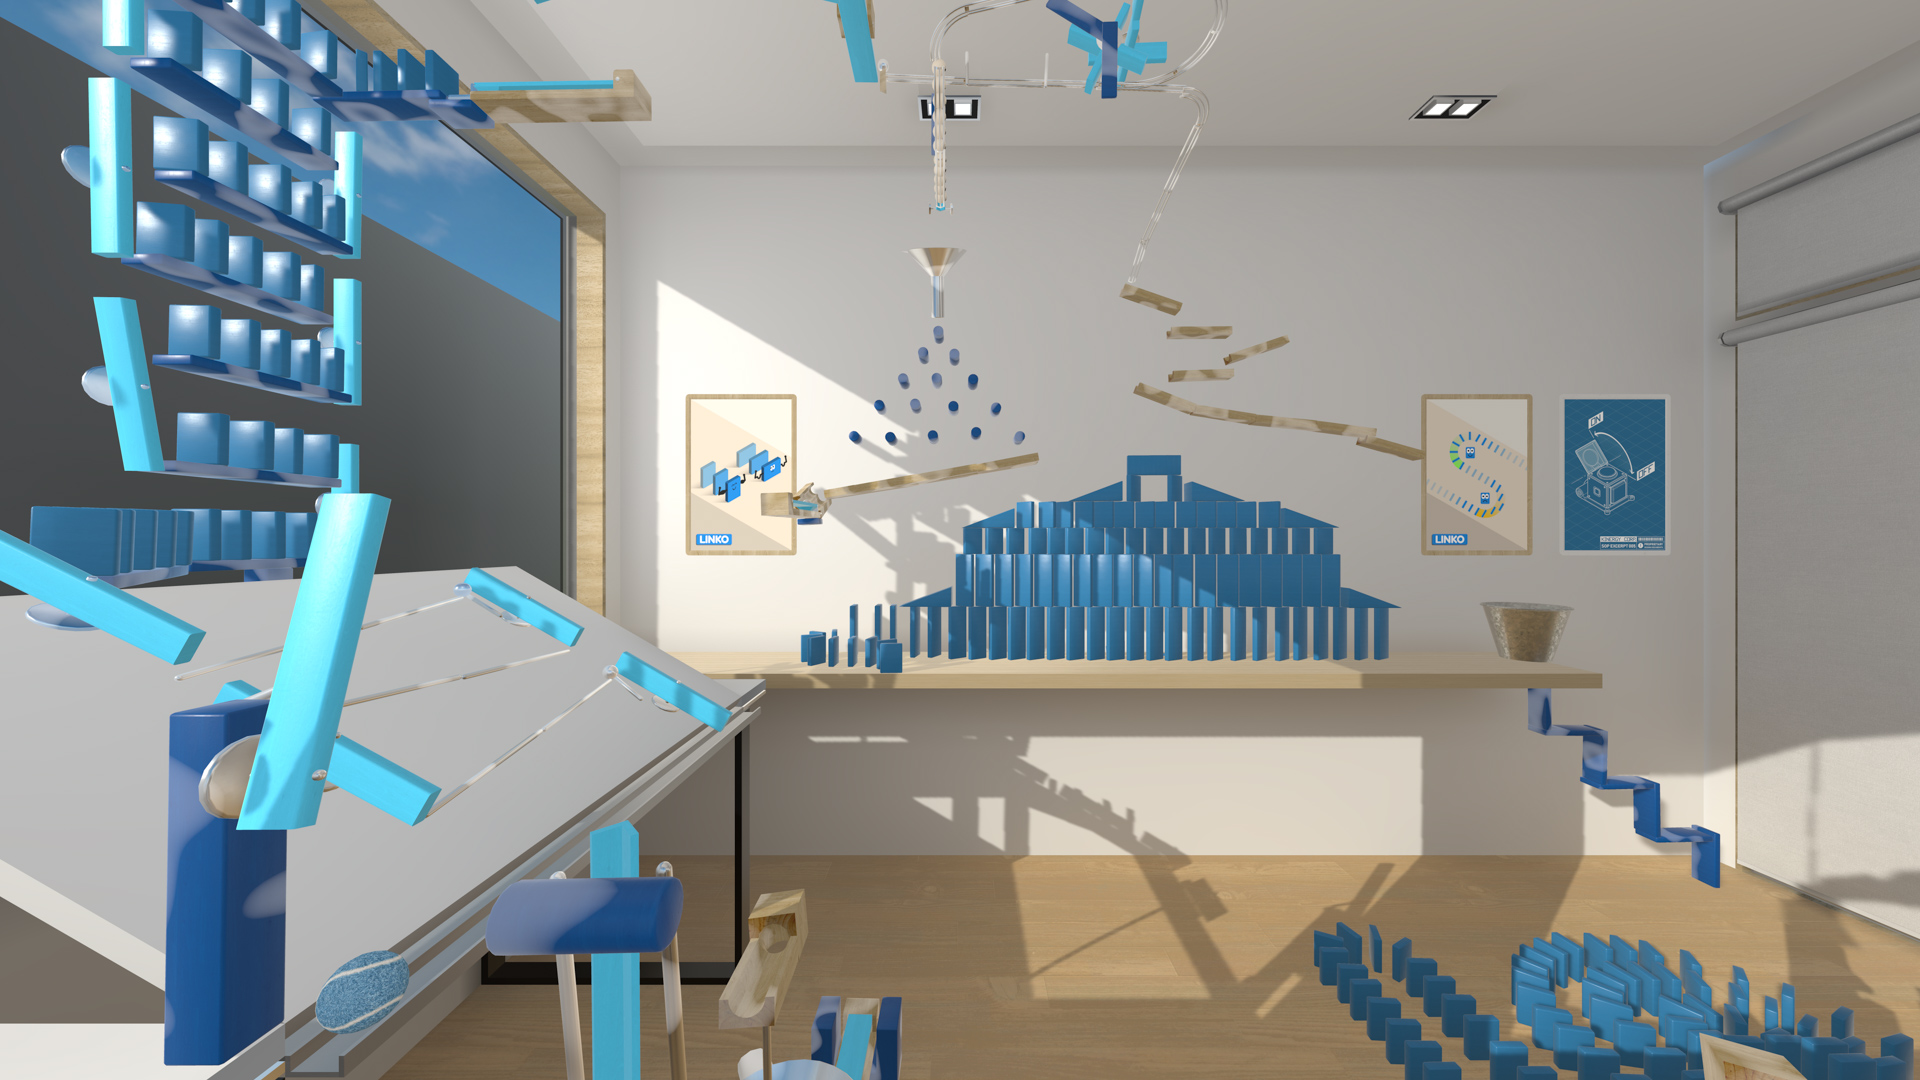 Rube Goldberg, Chain Reactions, and Virtual Reality with Gadgeteer